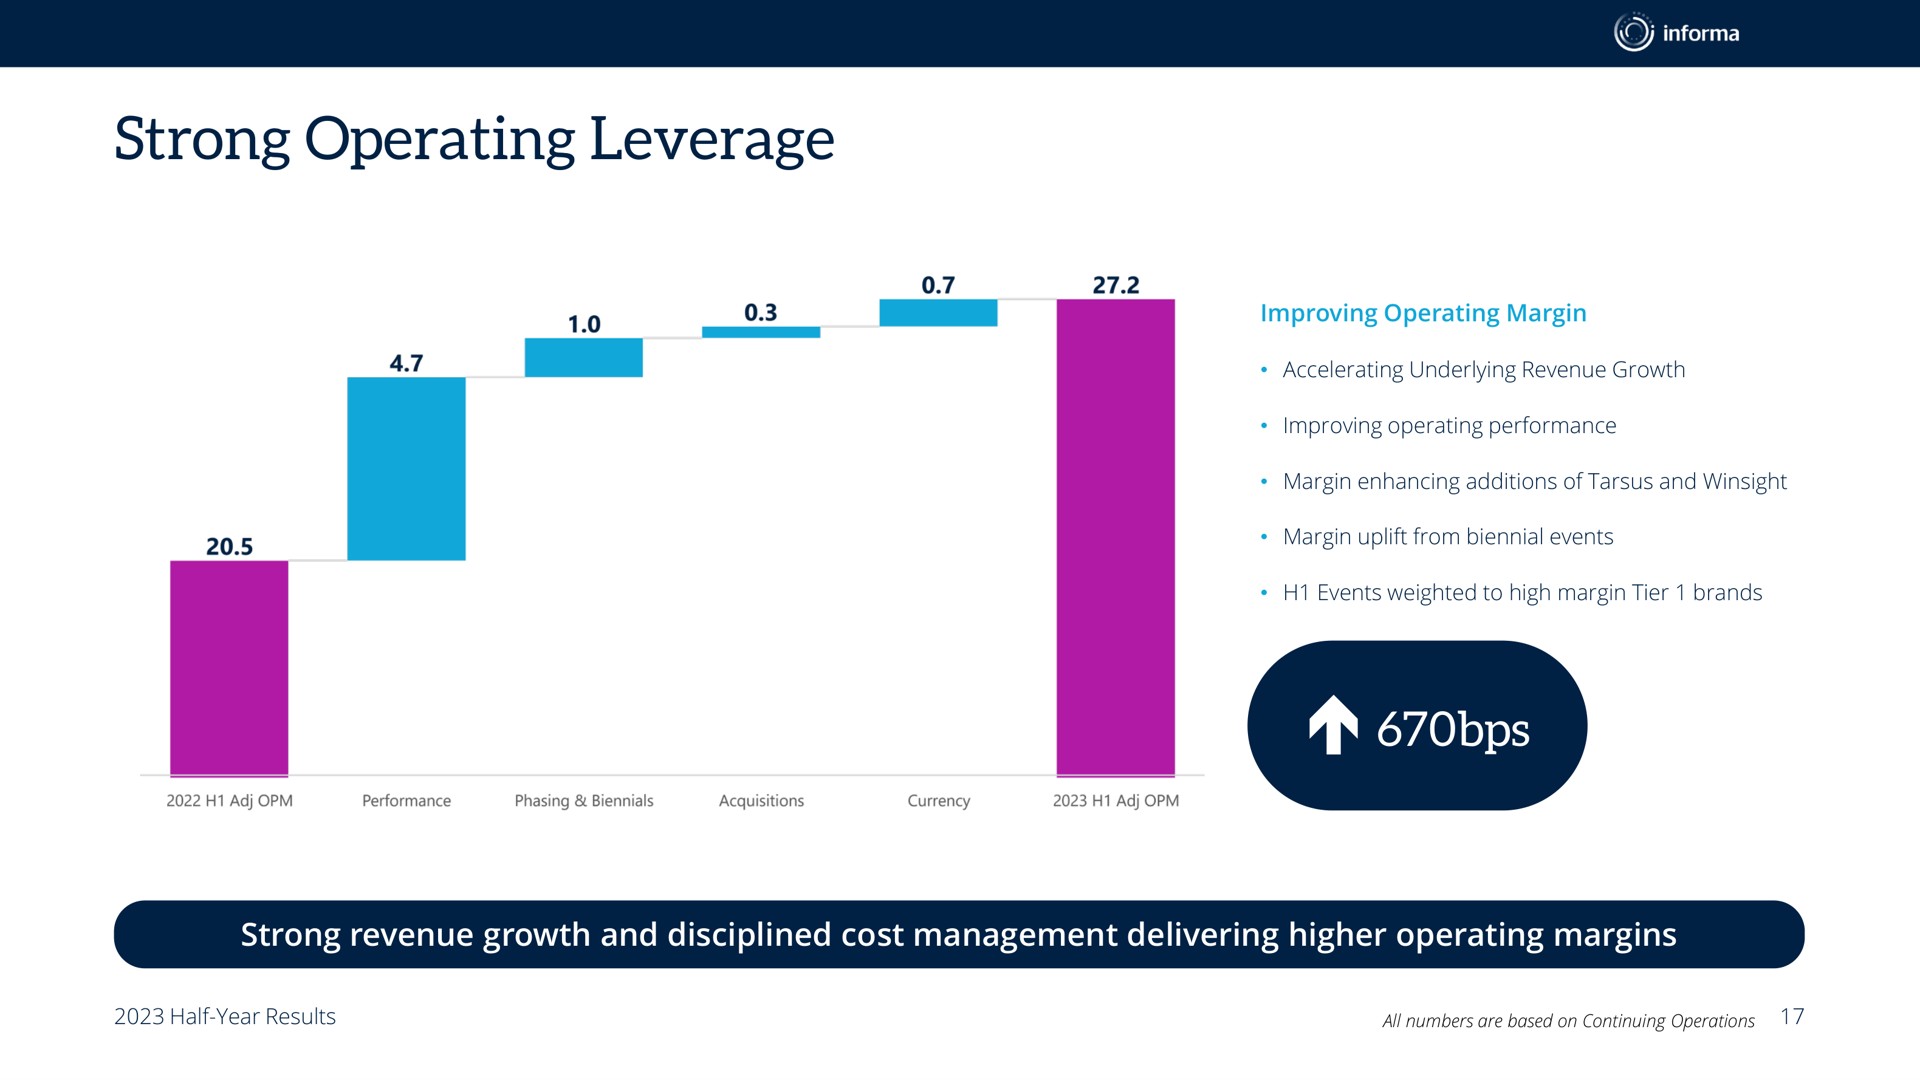 strong operating leverage | Informa